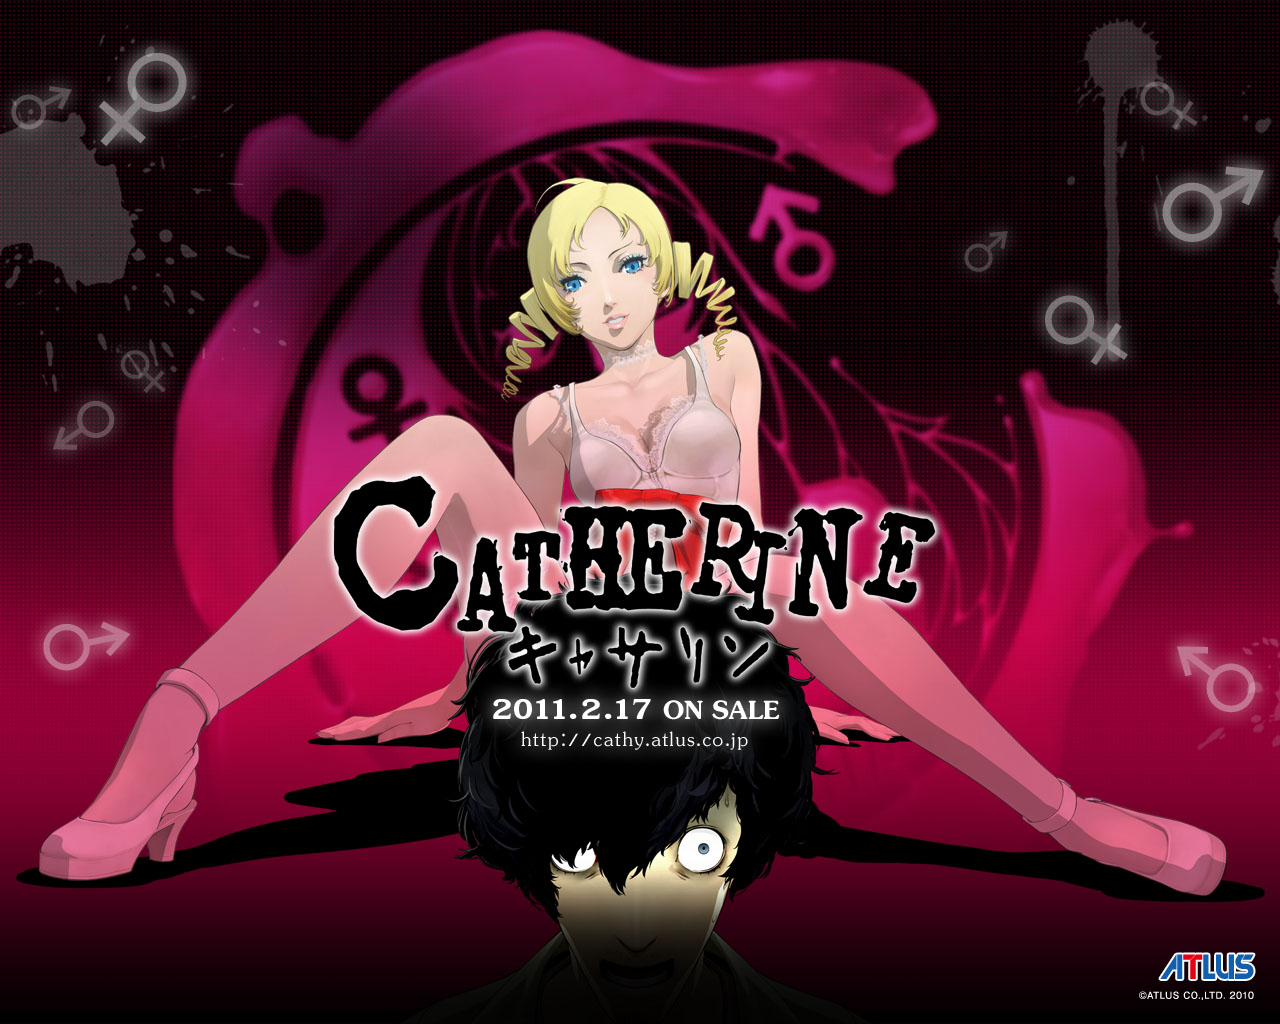 Catherine Game Artwork Related Keywords & Suggestions - Cath